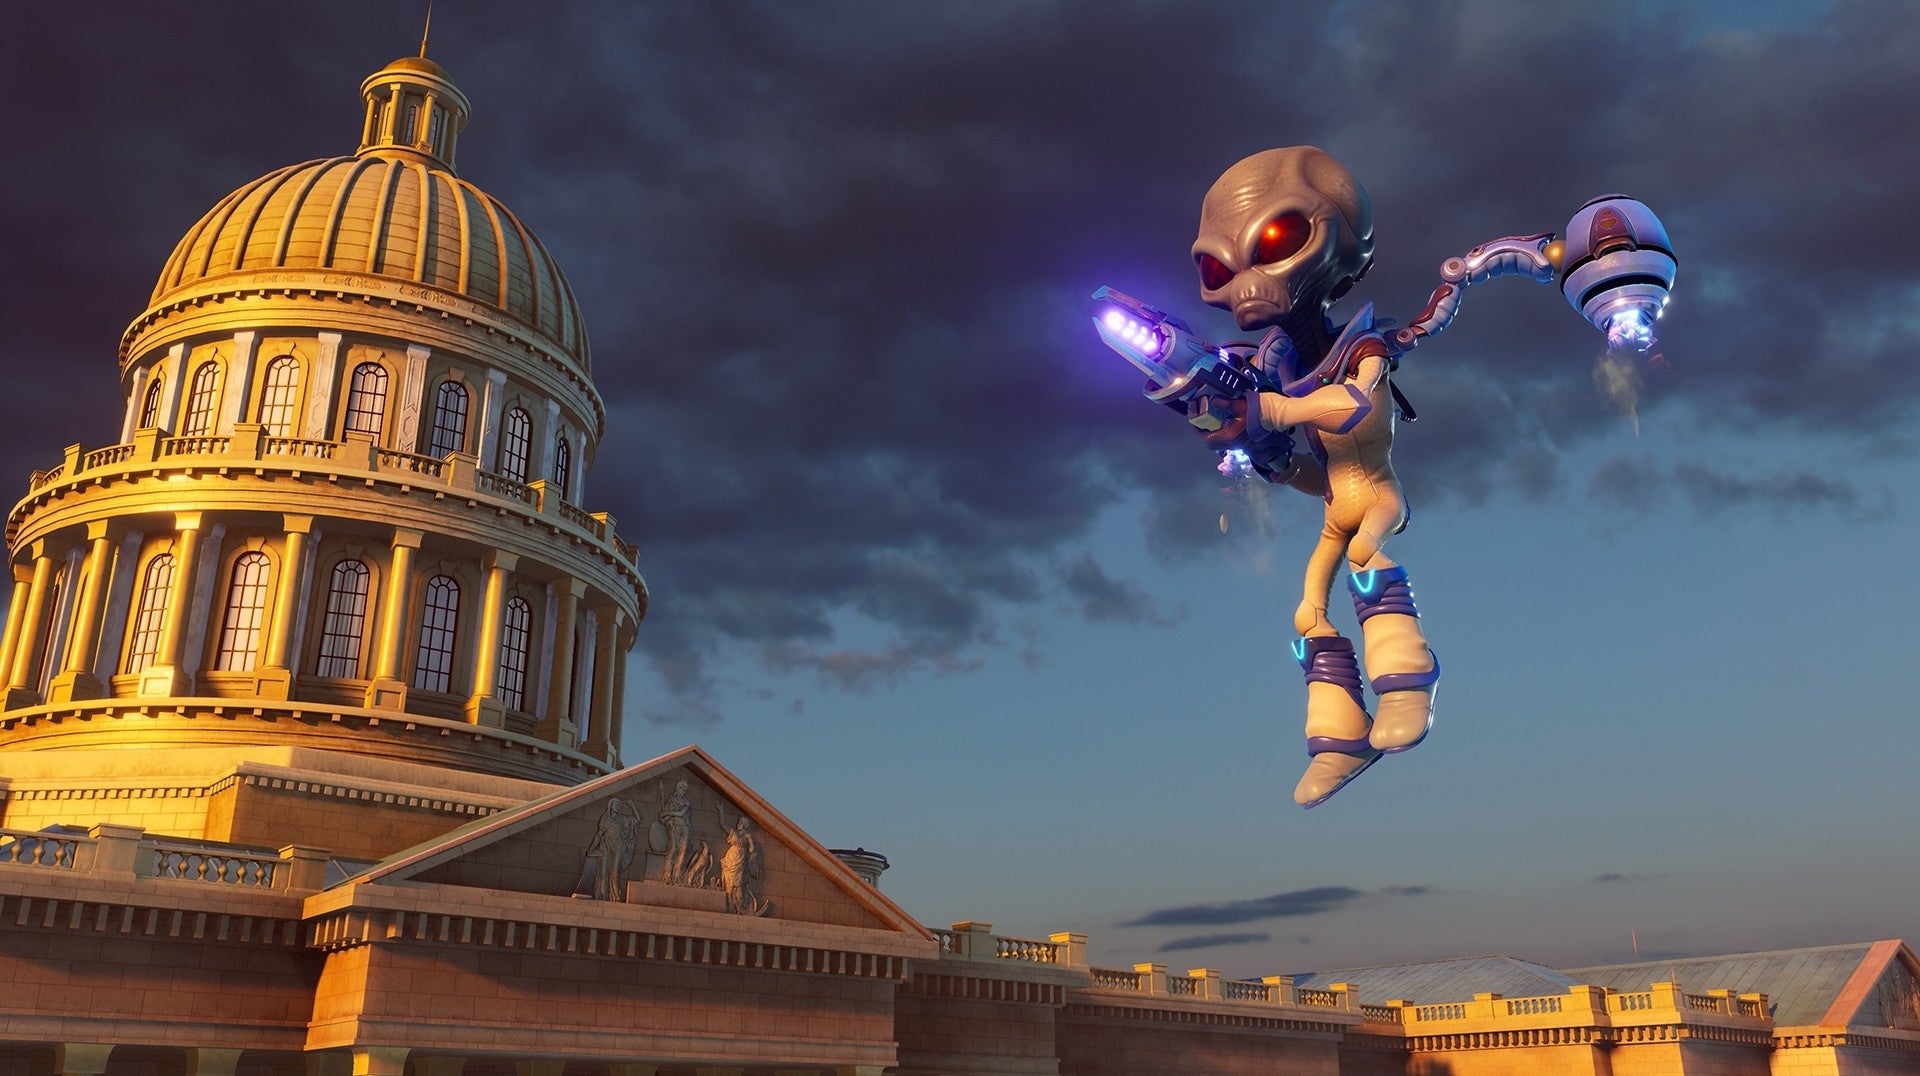 Image for Sony appears to have announced the Destroy All Humans 2 remake early